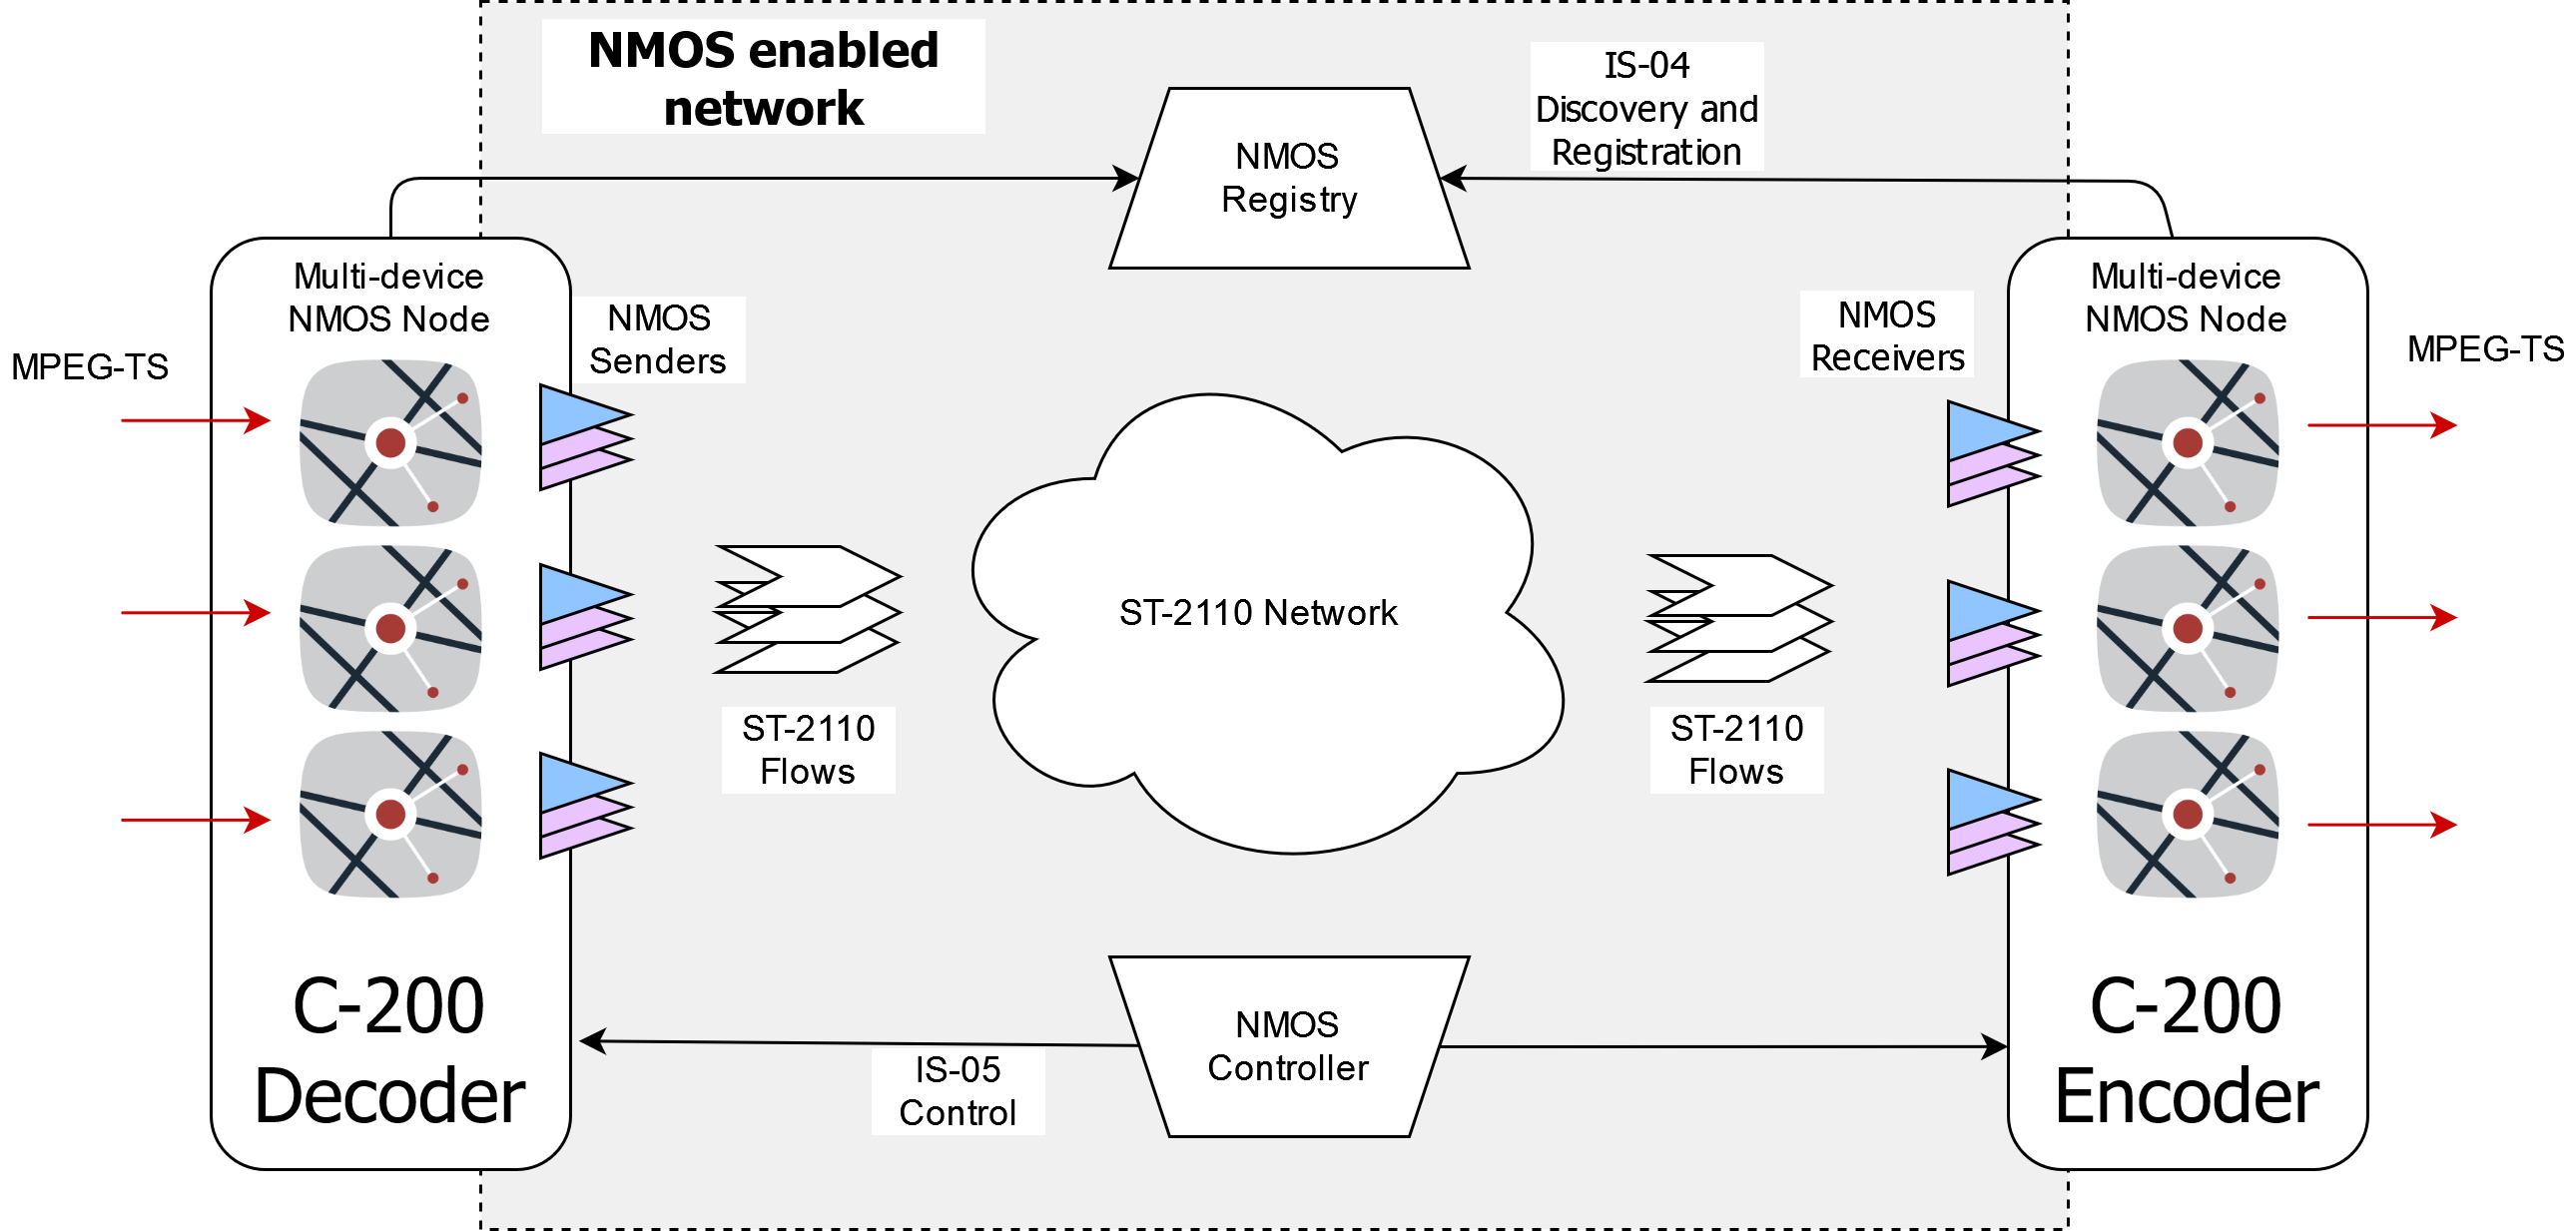 Implementing NMOS for our Encoders and Decoders with native Uncompressed IP Support